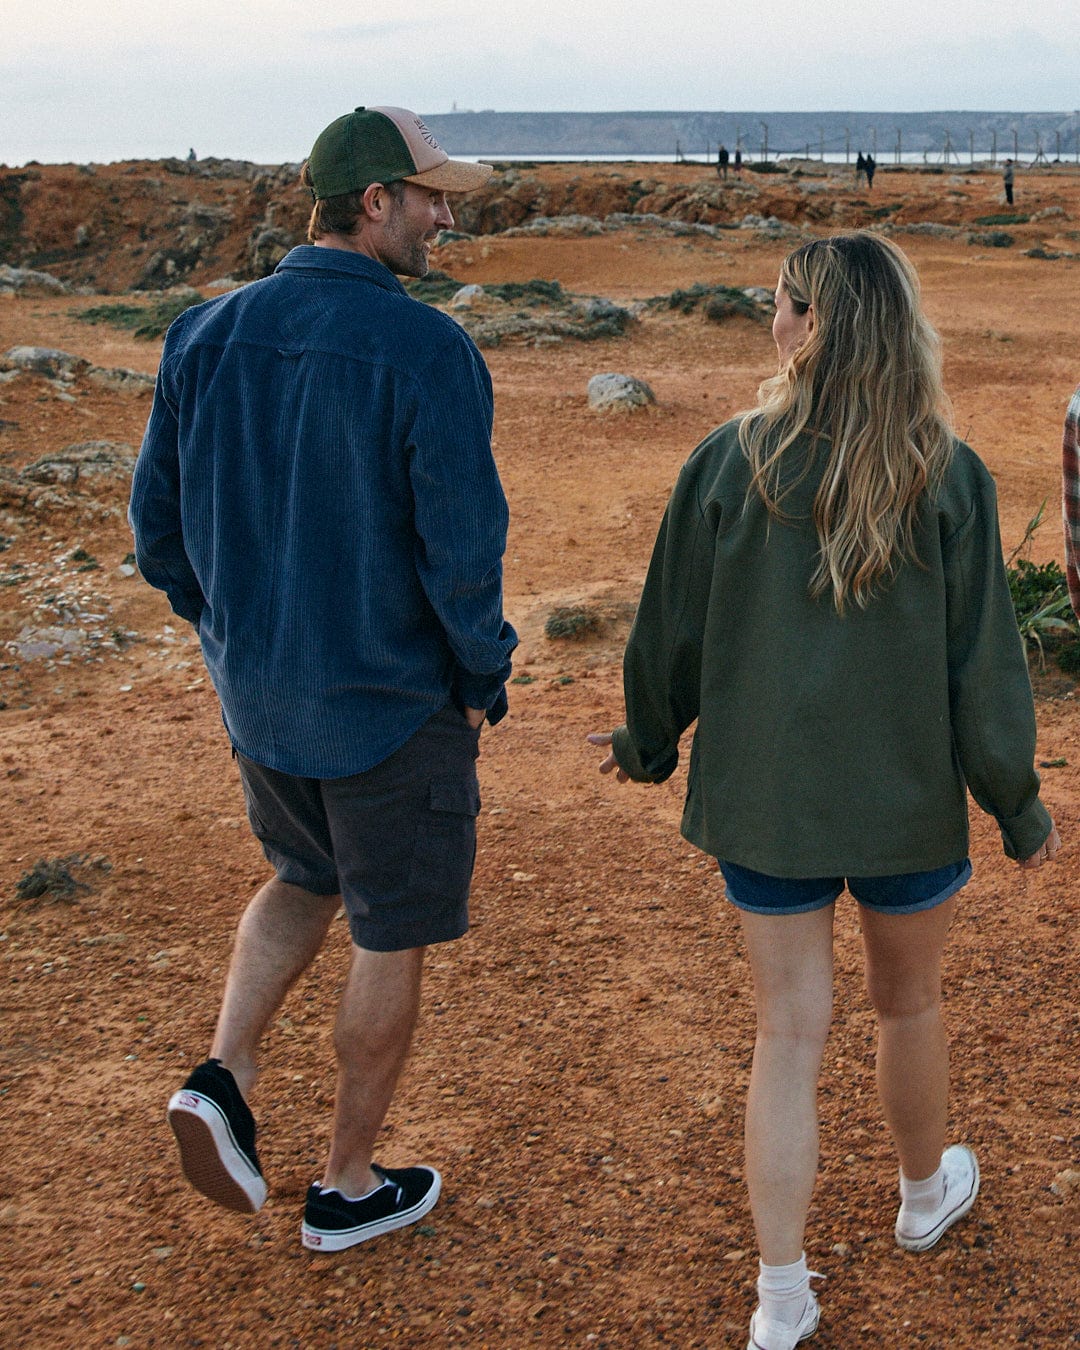 A man in a Saltrock Ace - Mens Long Sleeve Shirt - Blue and a woman walking on a dirt path.